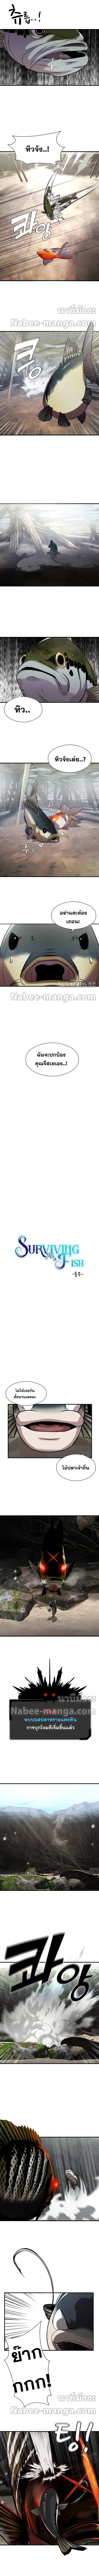 Surviving As a Fish 17 (3)